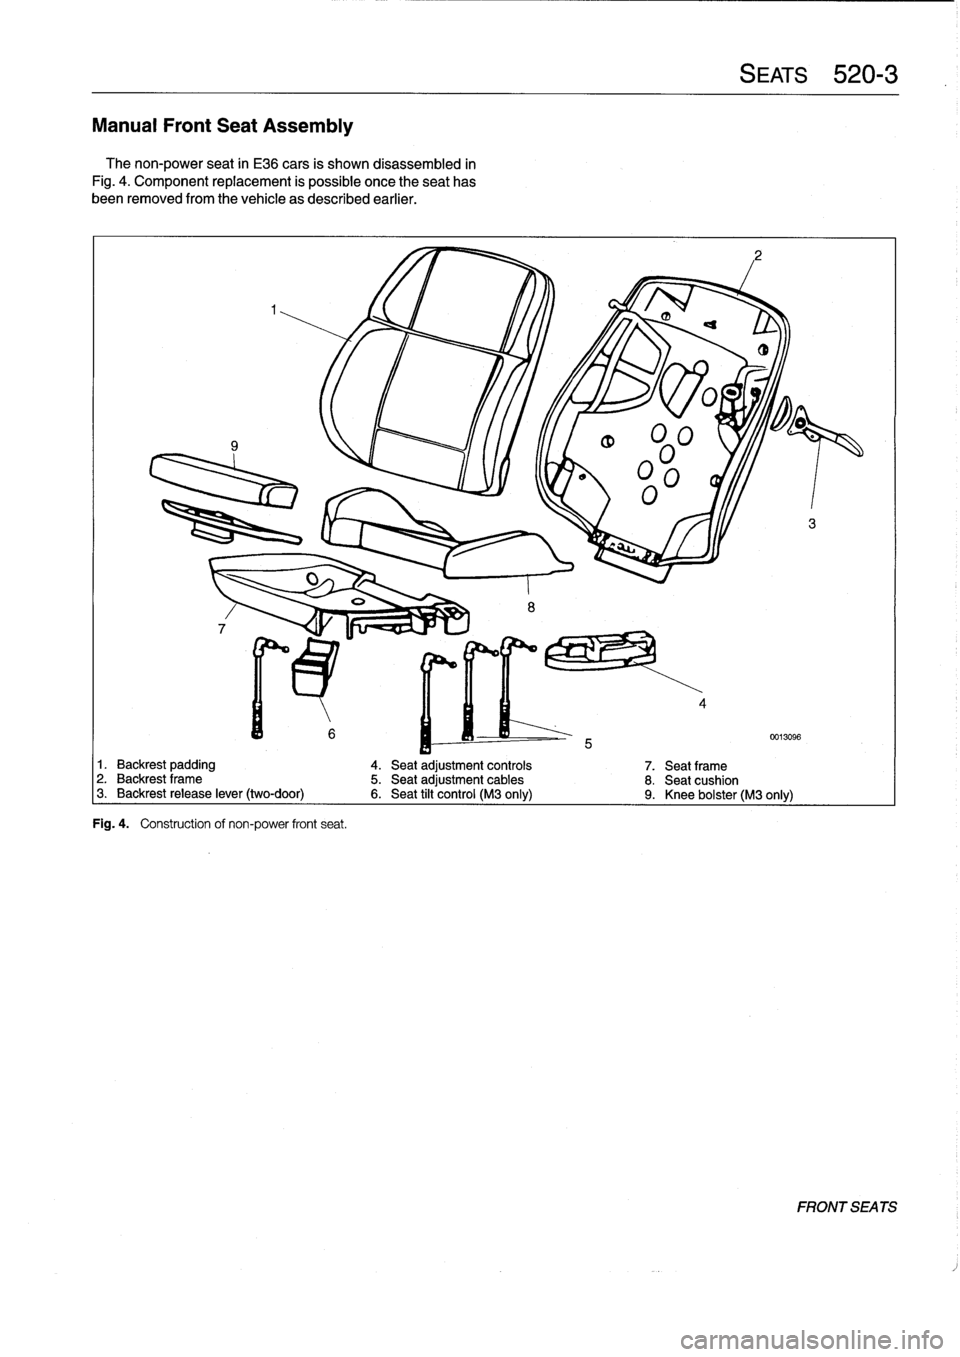 BMW 318i 1997 E36 Workshop Manual 
Manual
Front
Seat
Assembly

The
non-power
seat
in
E36
cars
is
shown
disassembled
in

Fig
.
4
.
Component
replacement
is
possible
once
theseat
has

been
removed
from
the
vehicle
as
described
earlier
.